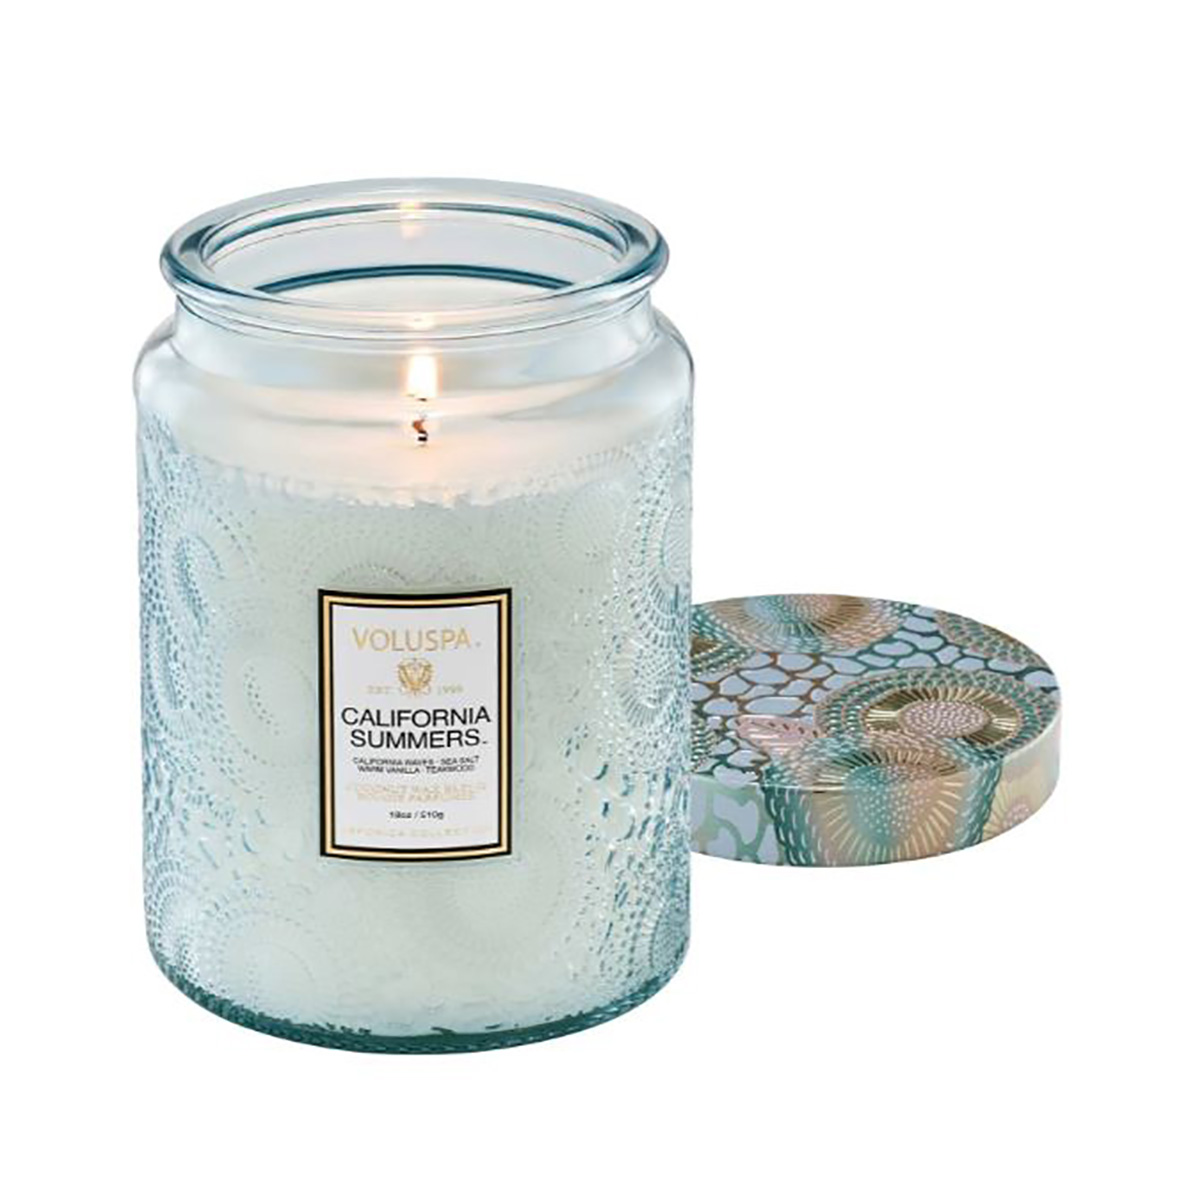 CALIFORNIA SUMMERS LARGE JAR CANDLE 